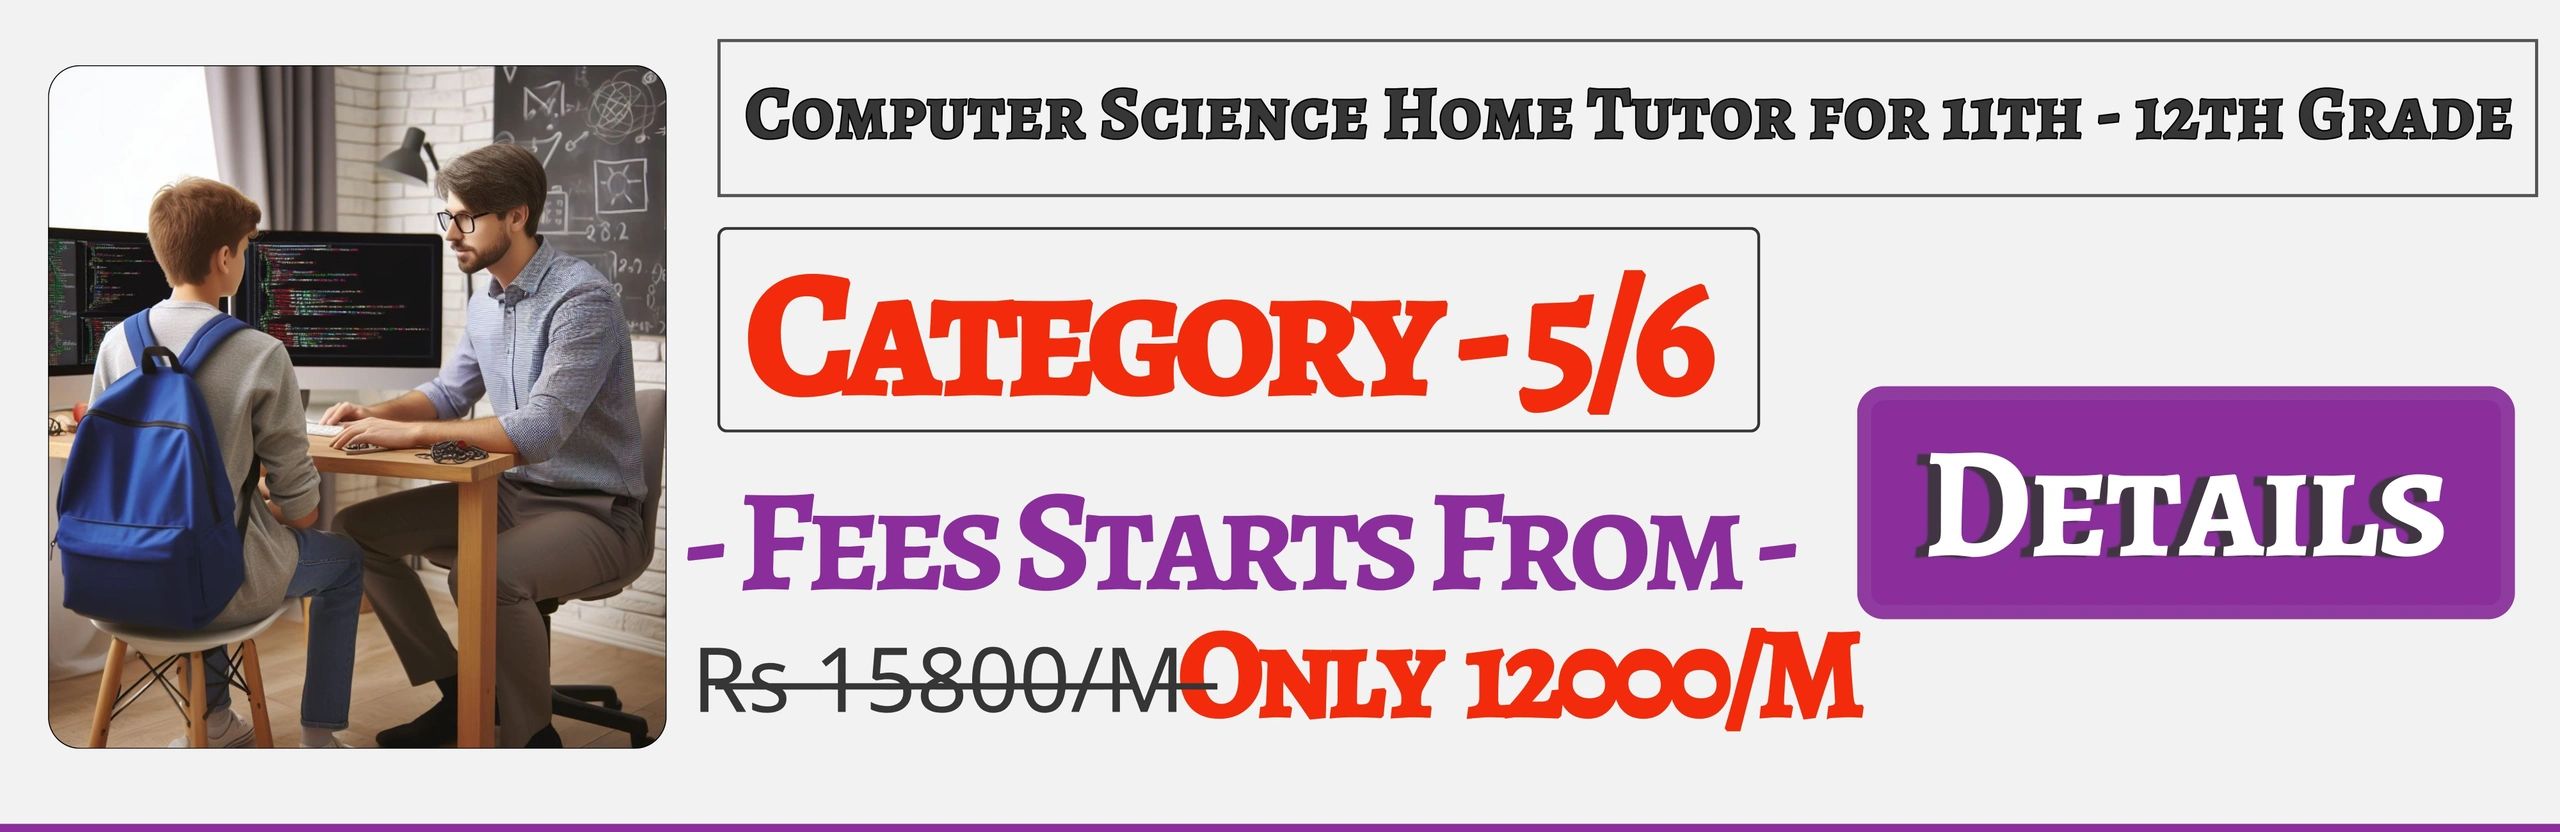 Book Best Nearby Computer Science Home Tuition Tutors For 11th & 12th In Jaipur , Fees Only 12000/M